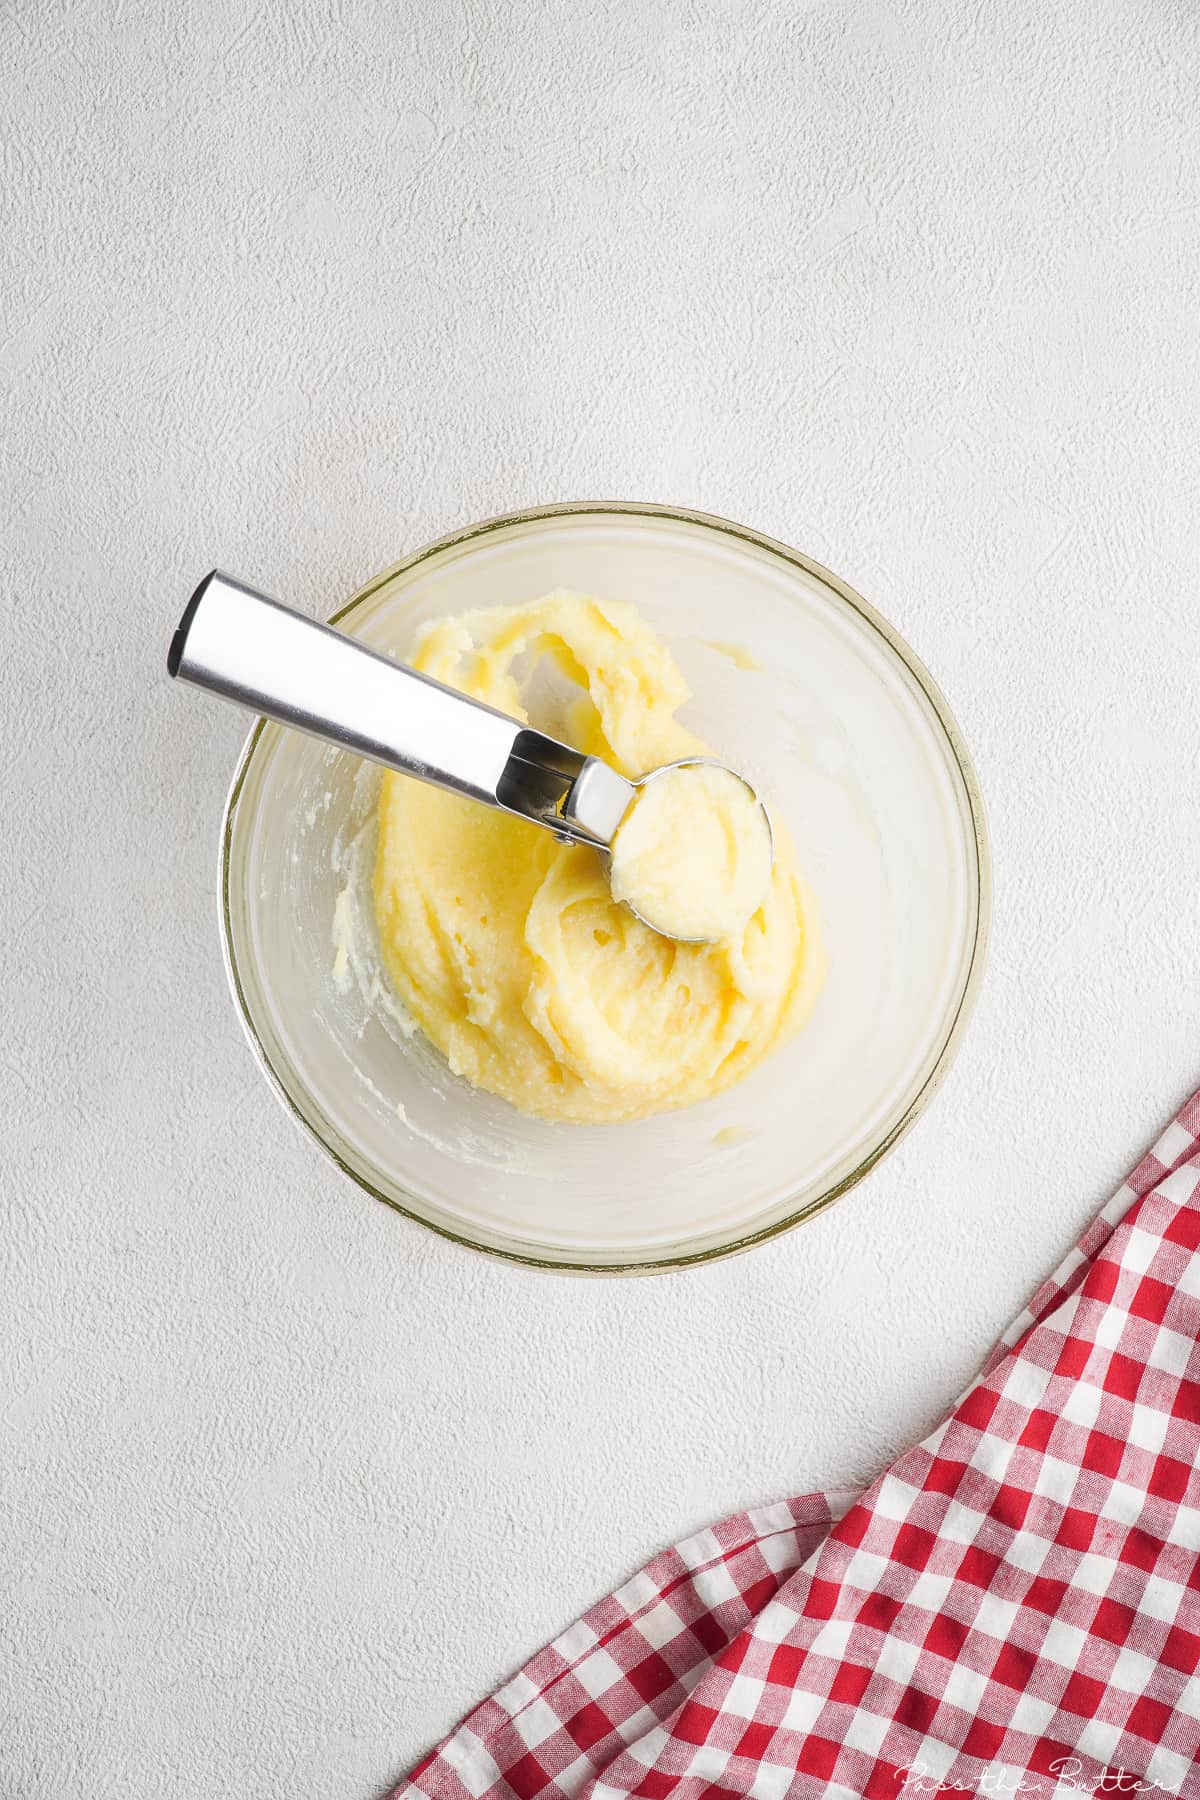 Use a cookie scoop or melon scoop to scoop out balls of the cream cheese mixture.